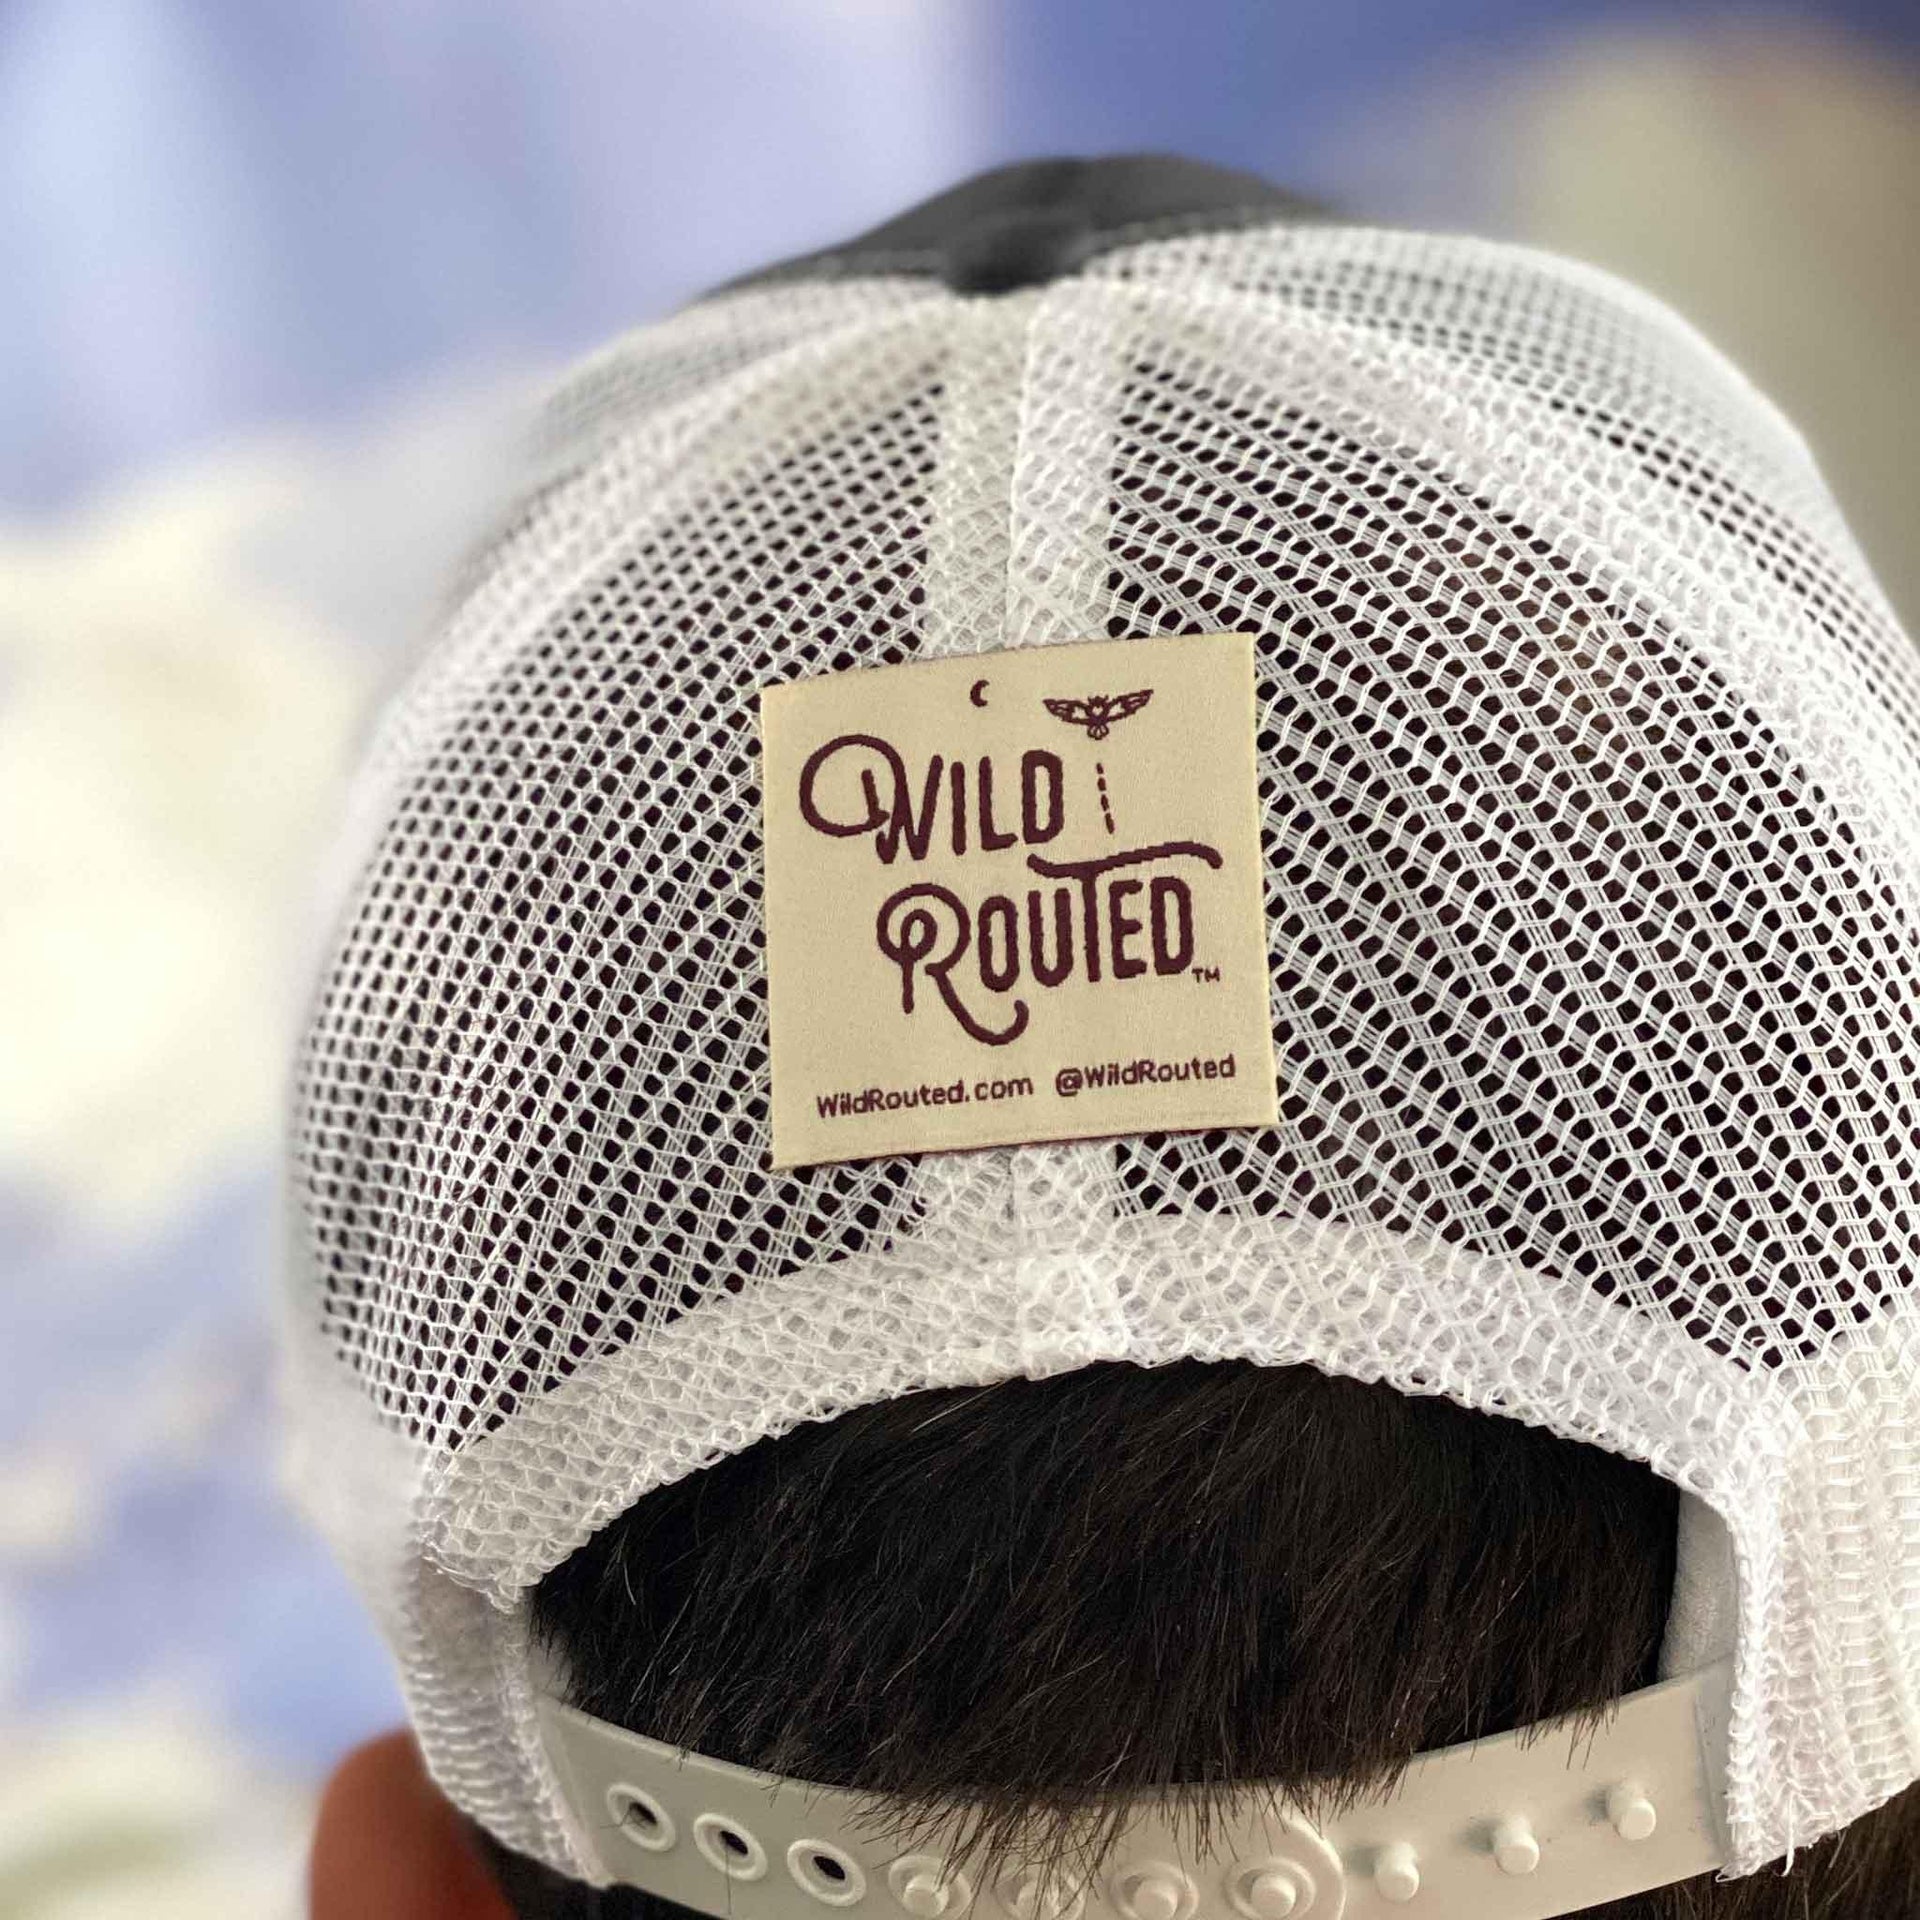 Wild Routed Trucker Cap - Wild Routed